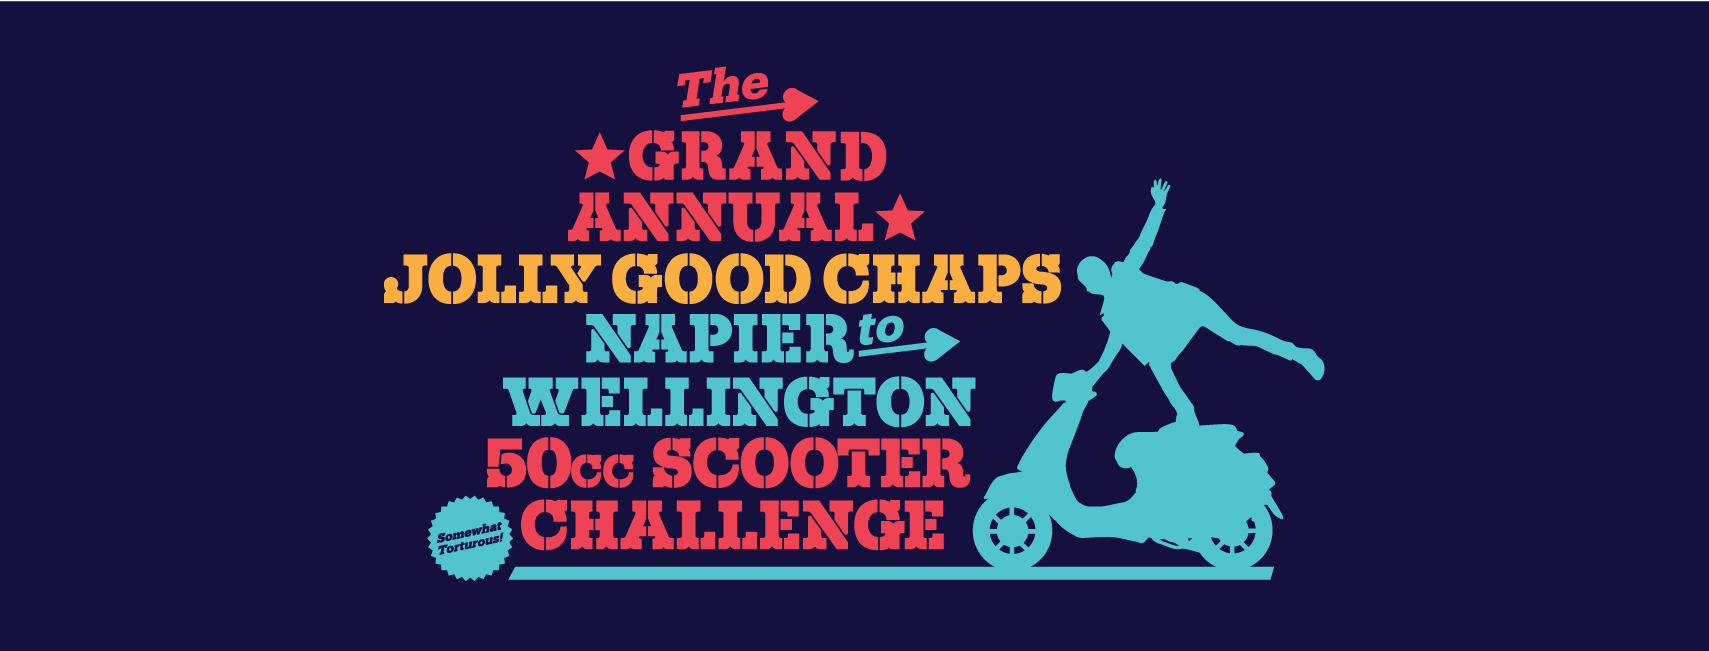 The Grand Annual Jolly Good Chaps Napier to Wellington 50cc Scooter Challenge